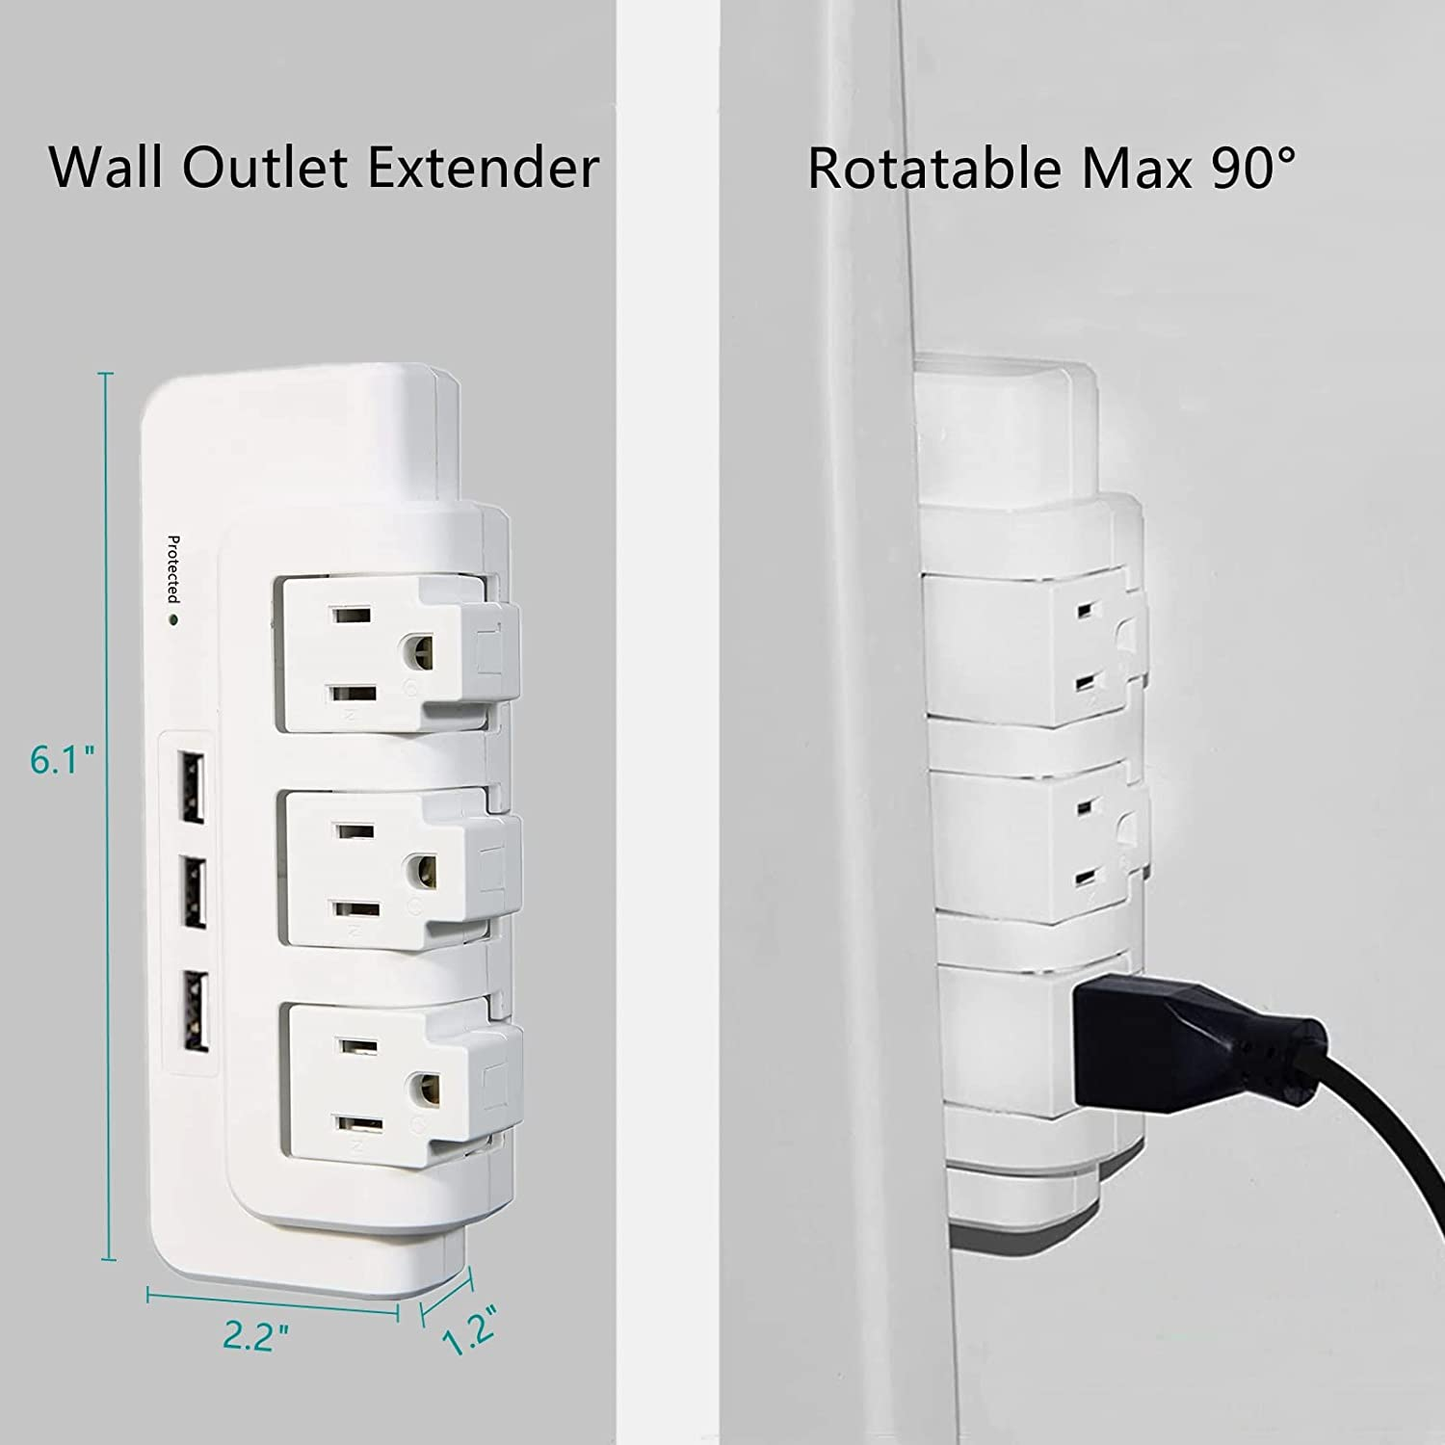 Wall Outlet Surge Protector, Multi Outlet Wall Plug with USB Ports, 540J, 1875W, Surge Protector Wall Tap for College, Dorm, Travel, White